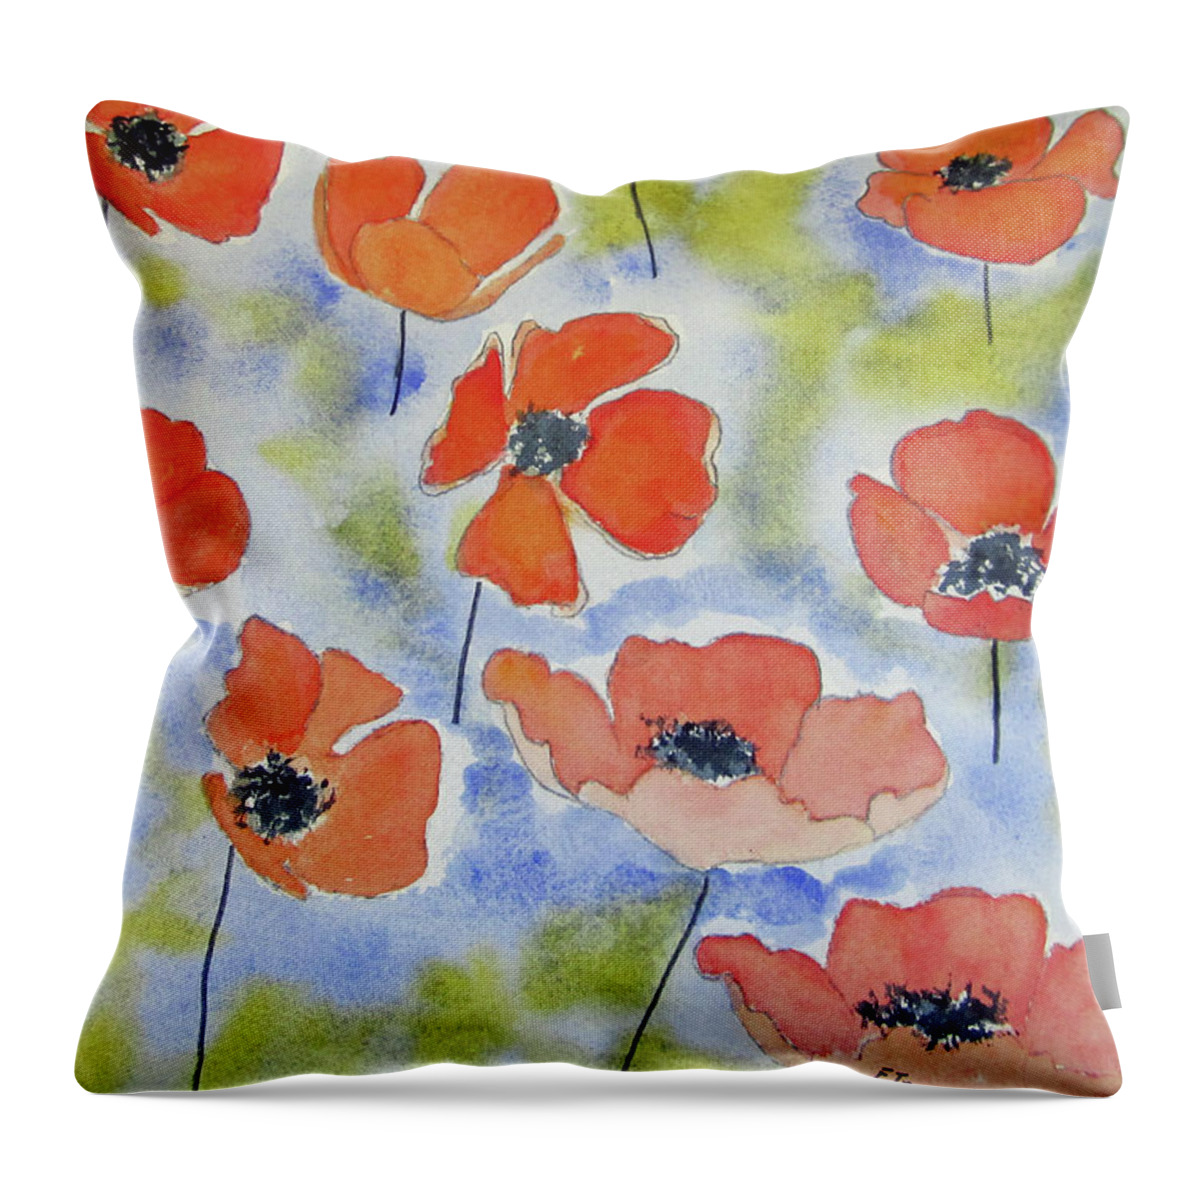 Floral Throw Pillow featuring the painting Dancing Poppies by Elvira Ingram